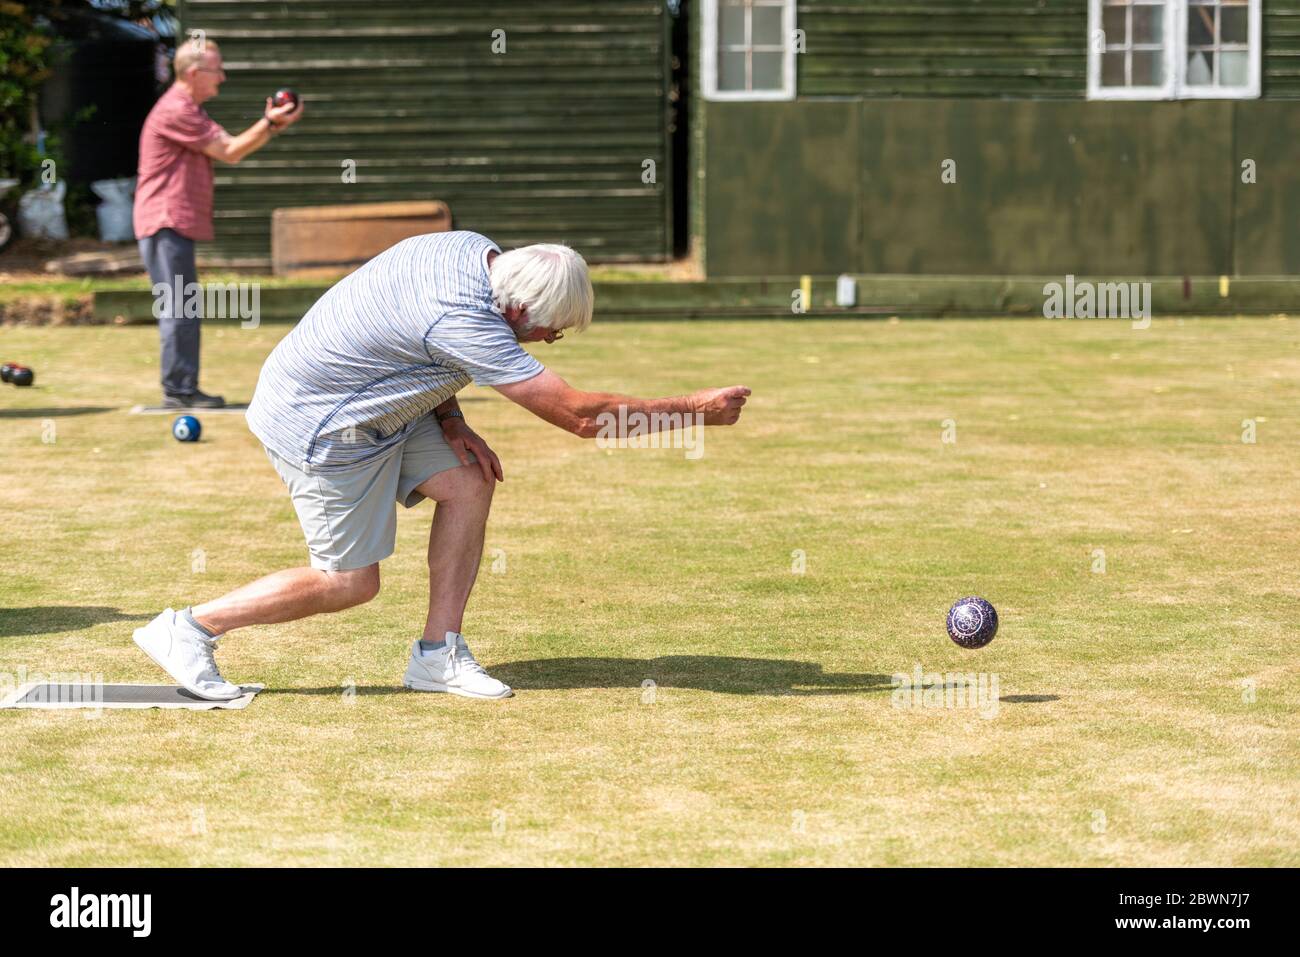 Willingham Cambridgeshire, UK. 2nd June, 2020. Members of the Willingham Bowls Club take part in a roll up on the local green as lockdown from the Covid 19 quarantine is lifted and rules allow the start of some outdoor sports. Competitive matches are still not allowed as lanes are left unoccupied to allow for social distancing. Credit: Julian Eales/Alamy Live News Stock Photo